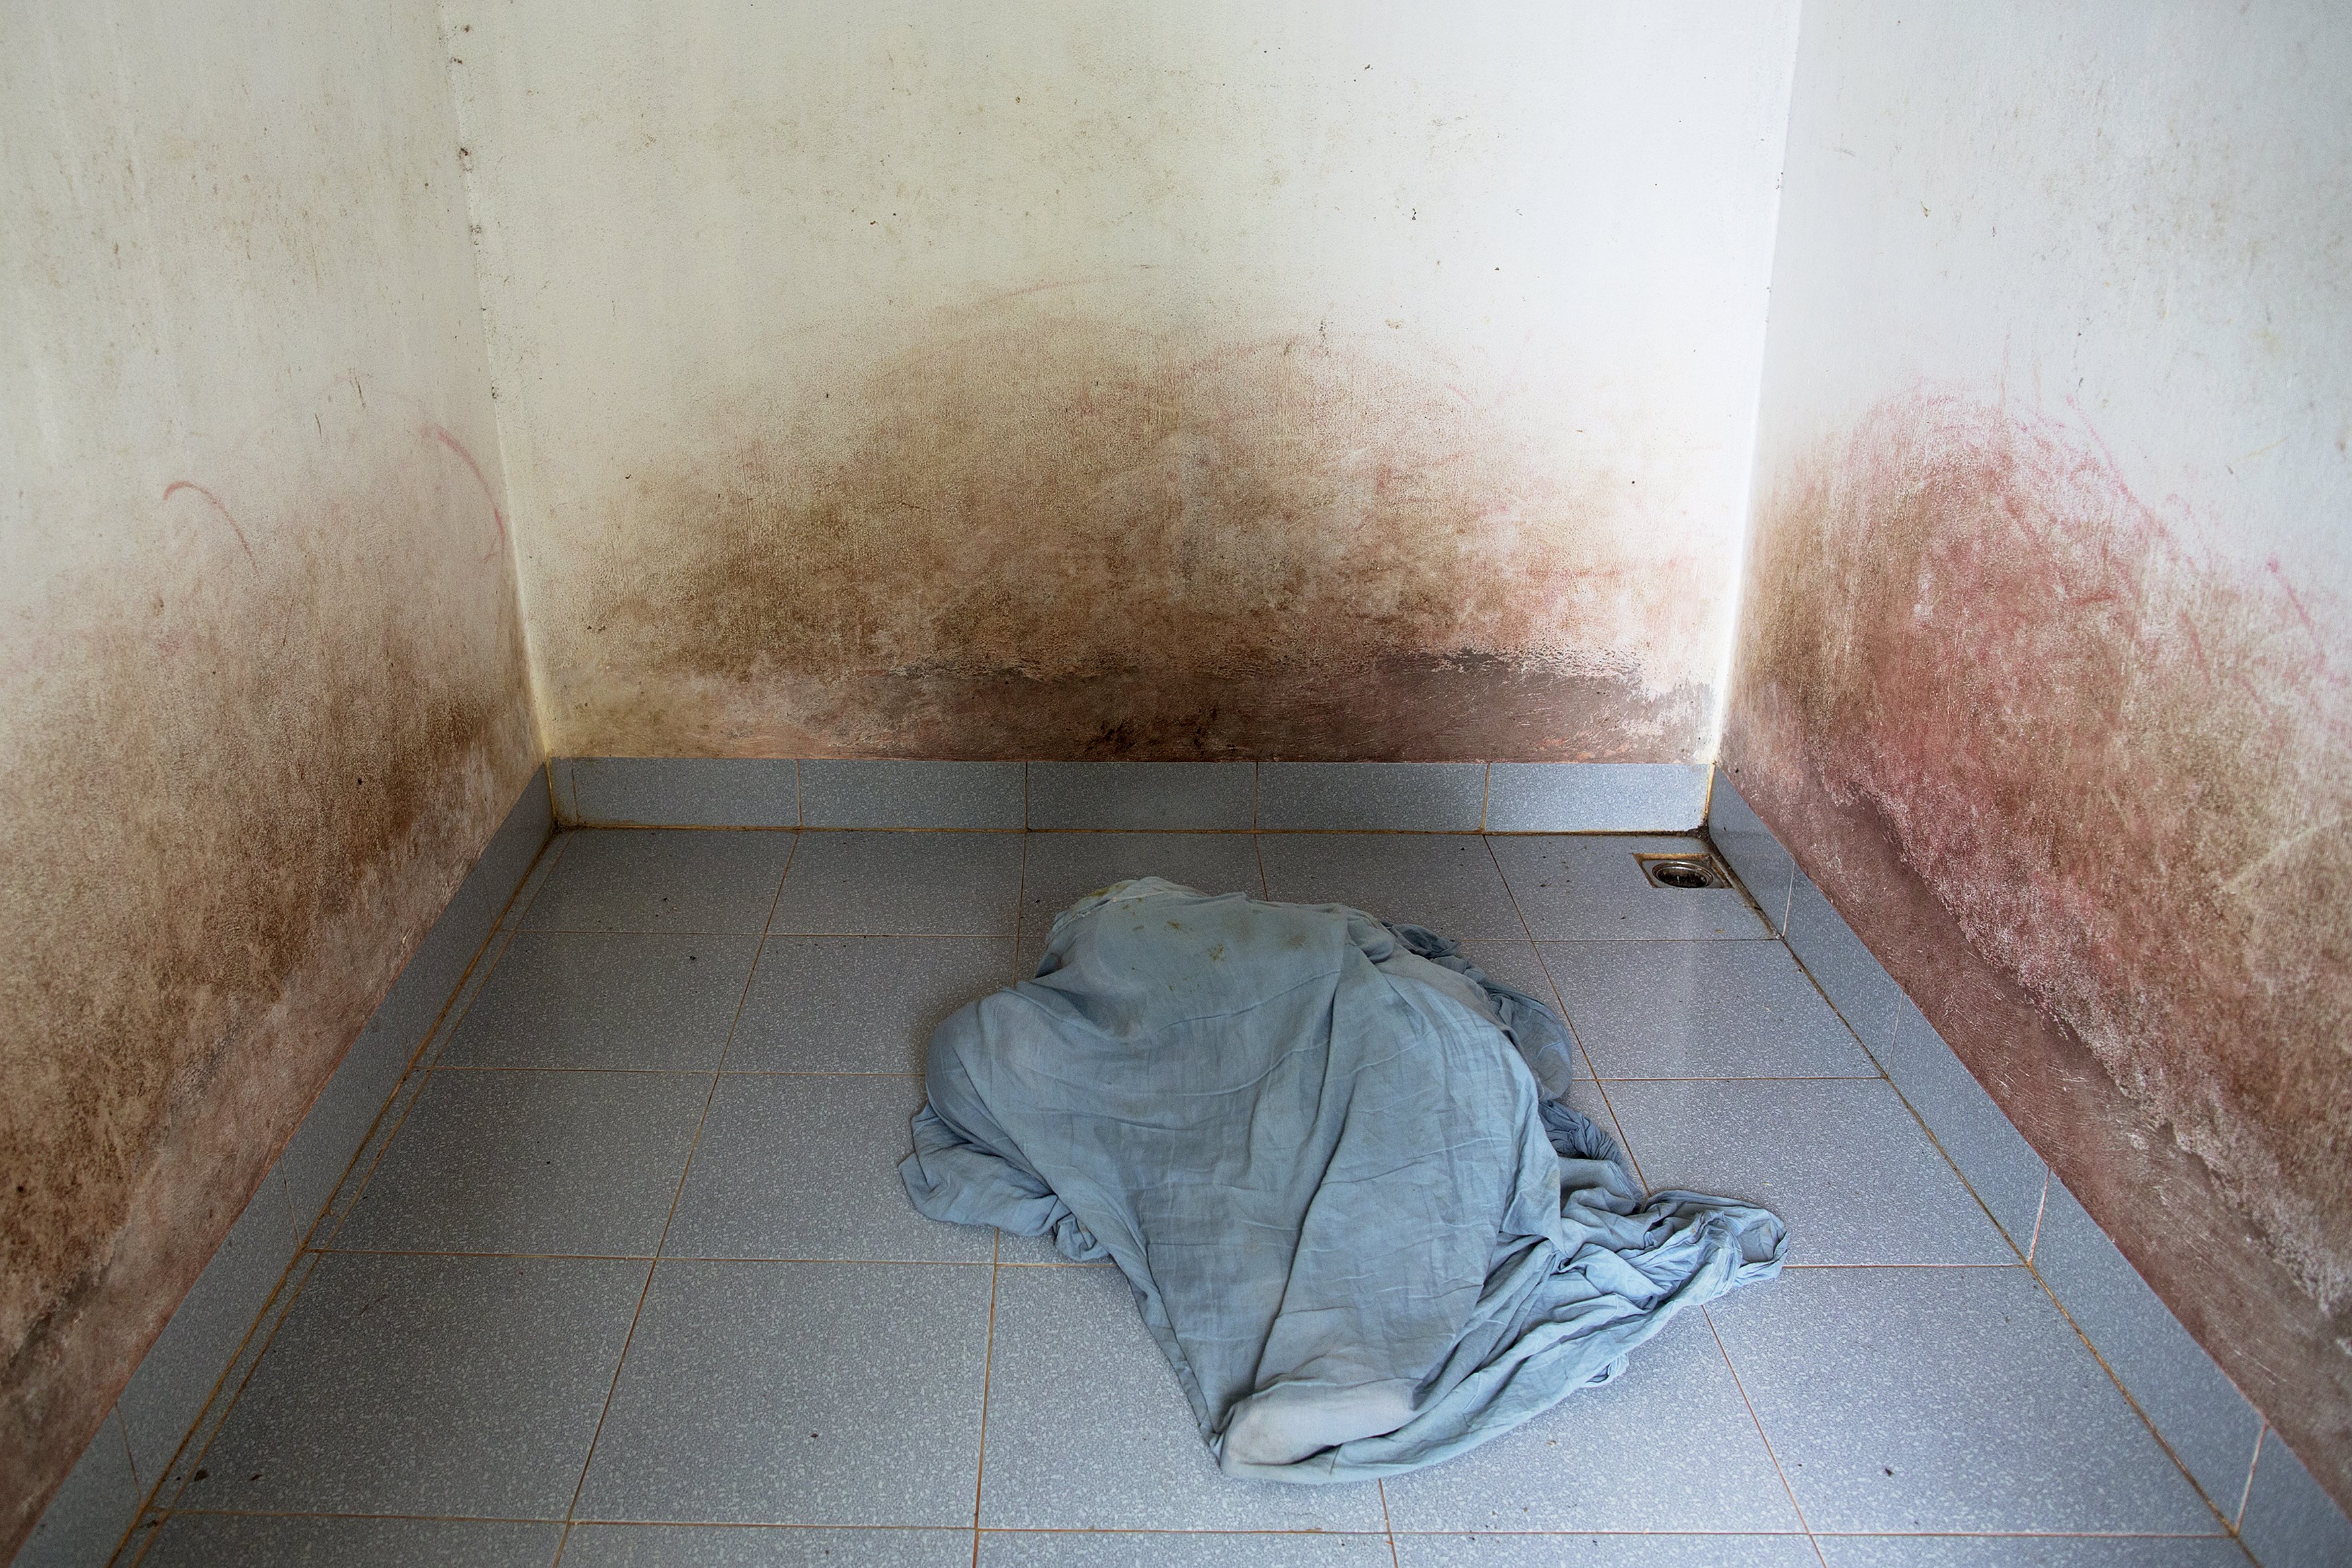 38-year-old Doan Thi Hong Gam, who suffers from severe mental as well as physical health problems, covers herself with a blanket in an empty room in Thai Binh province, northern Vietnam April 10, 2015. Doan Thi Hong Gam spends her time in an empty room. She is kept isolated because of aggressive behaviour linked to mental health problems. Her father, who suffers from serious heath problems, served as a Vietnamese soldier from the North during the war and said he was exposed to Agent Orange while fighting in the Central Highlands. Doan Thi Hong Gam’s family and health workers believe her health problems are linked to Agent Orange.